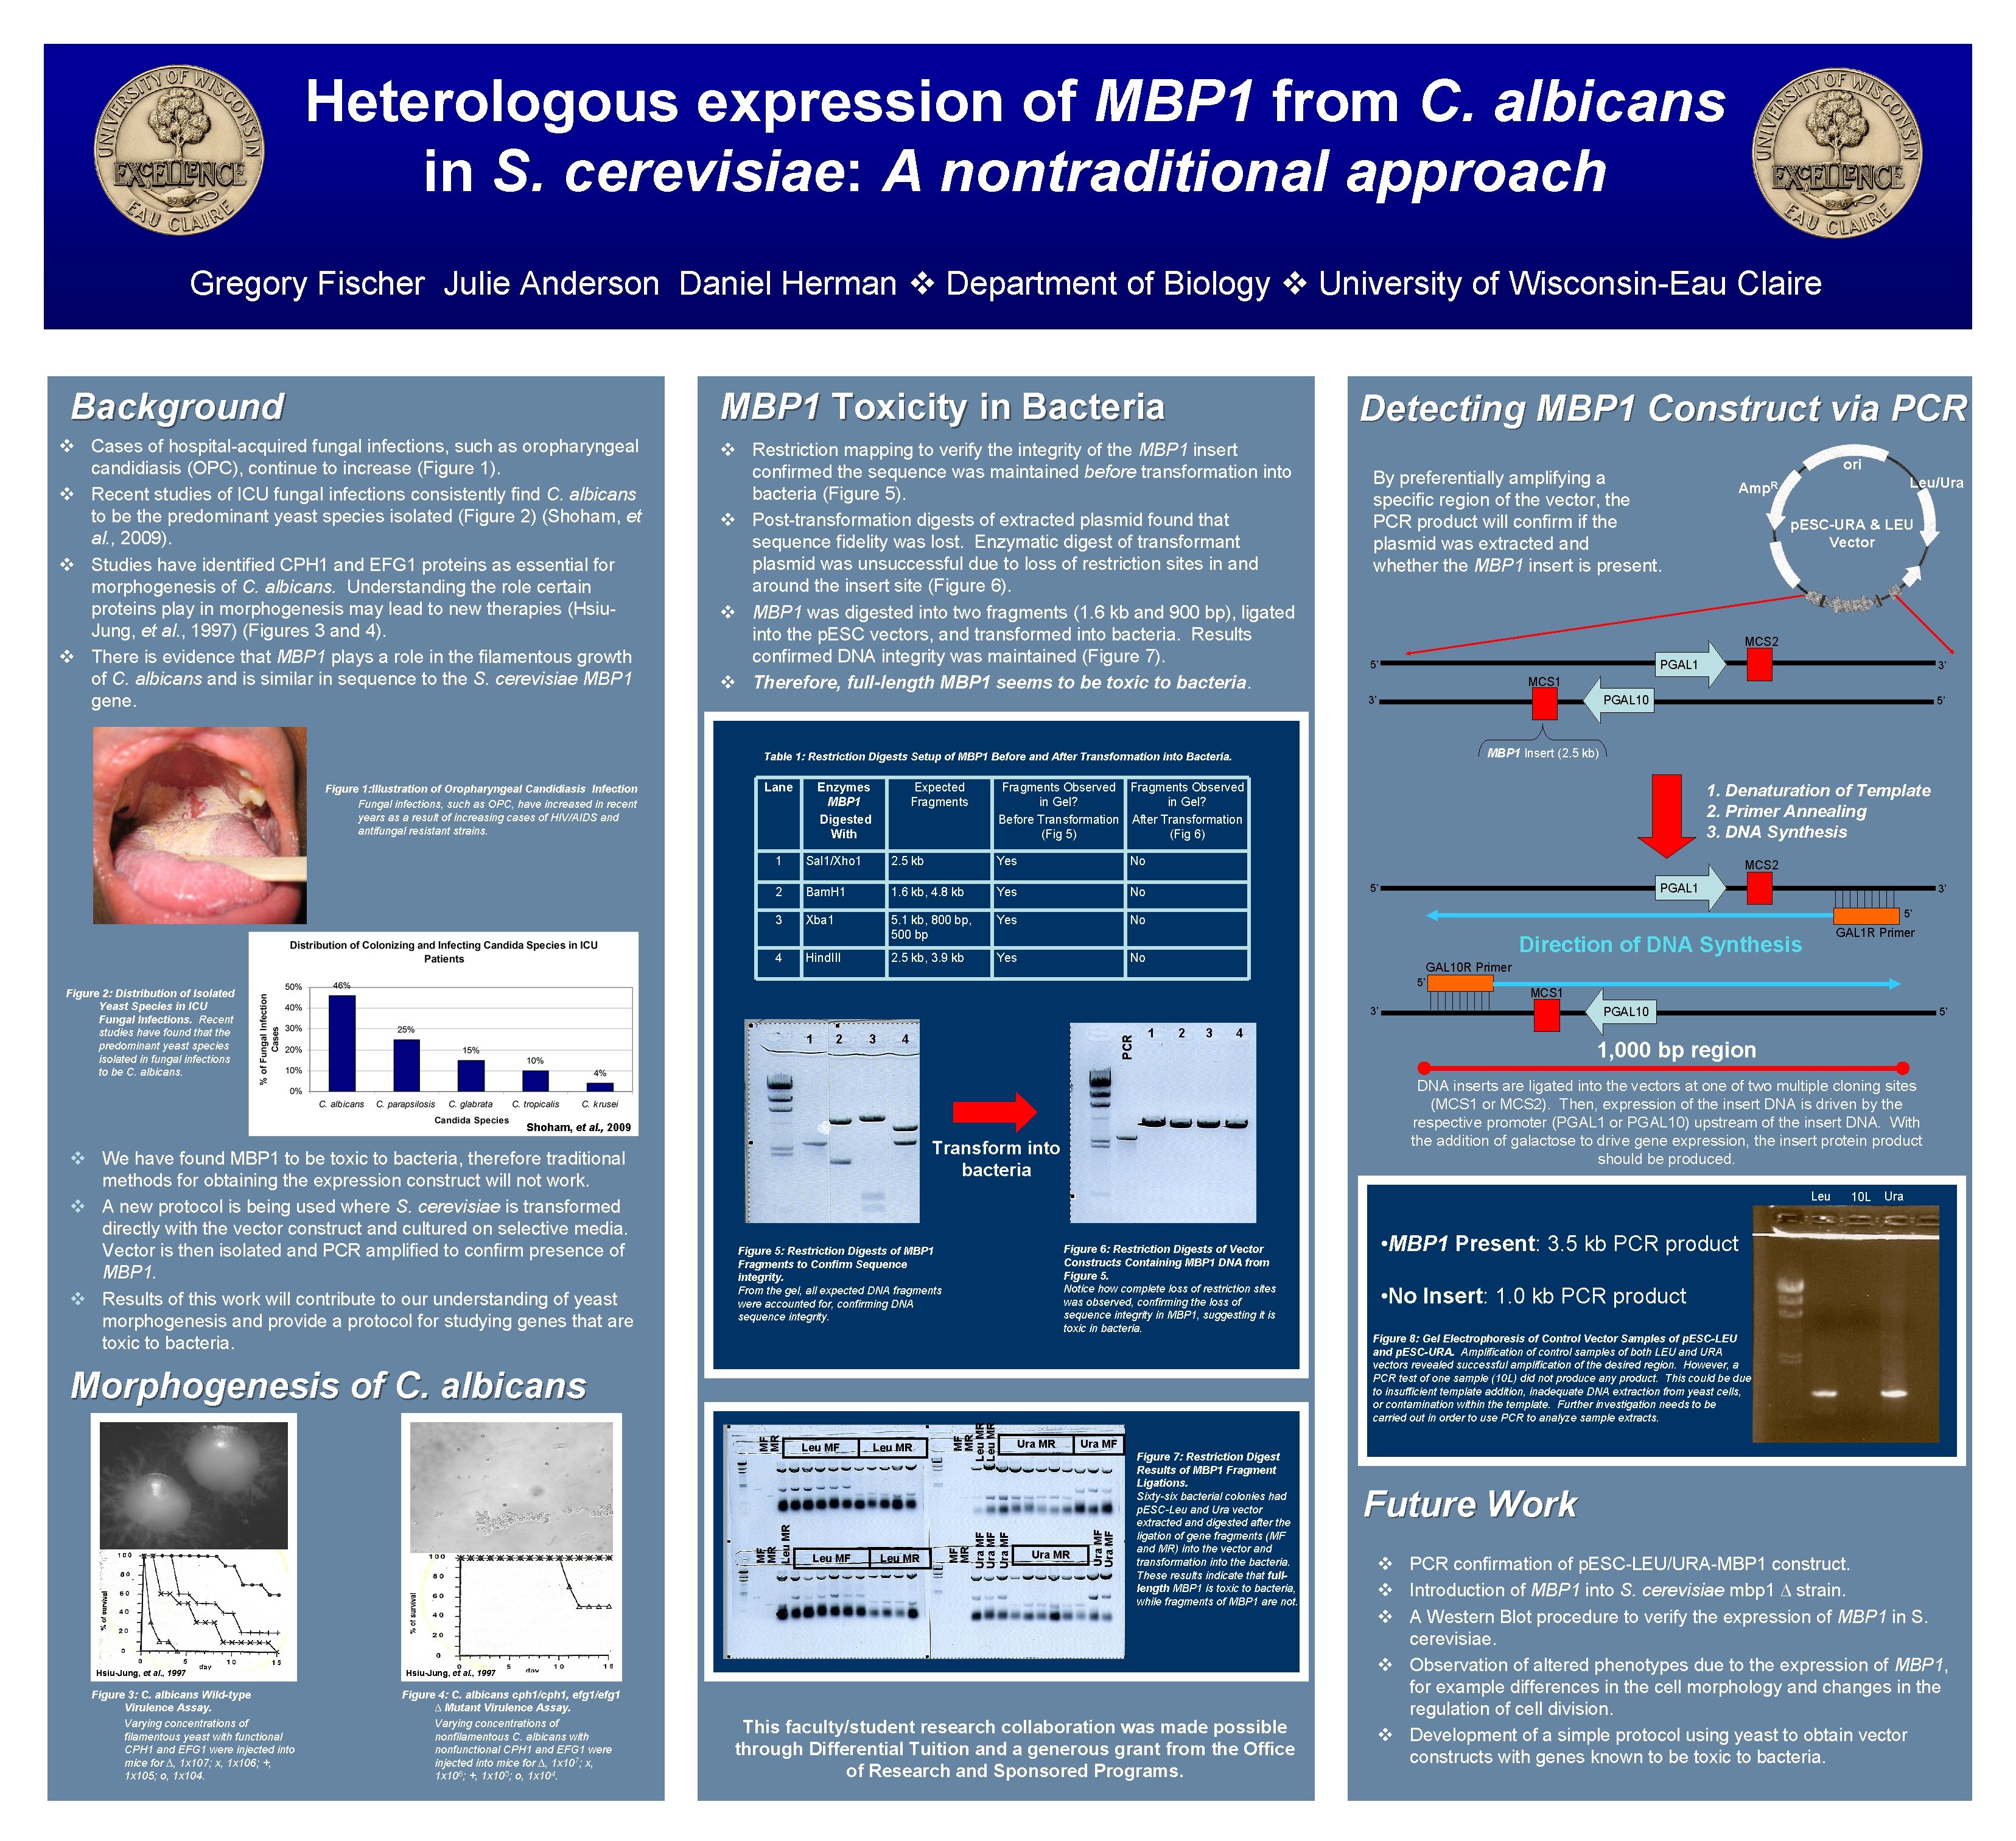 Heterologous expression of MBP 1 from C. albicans in S. cerevisiae: A nontraditional approach